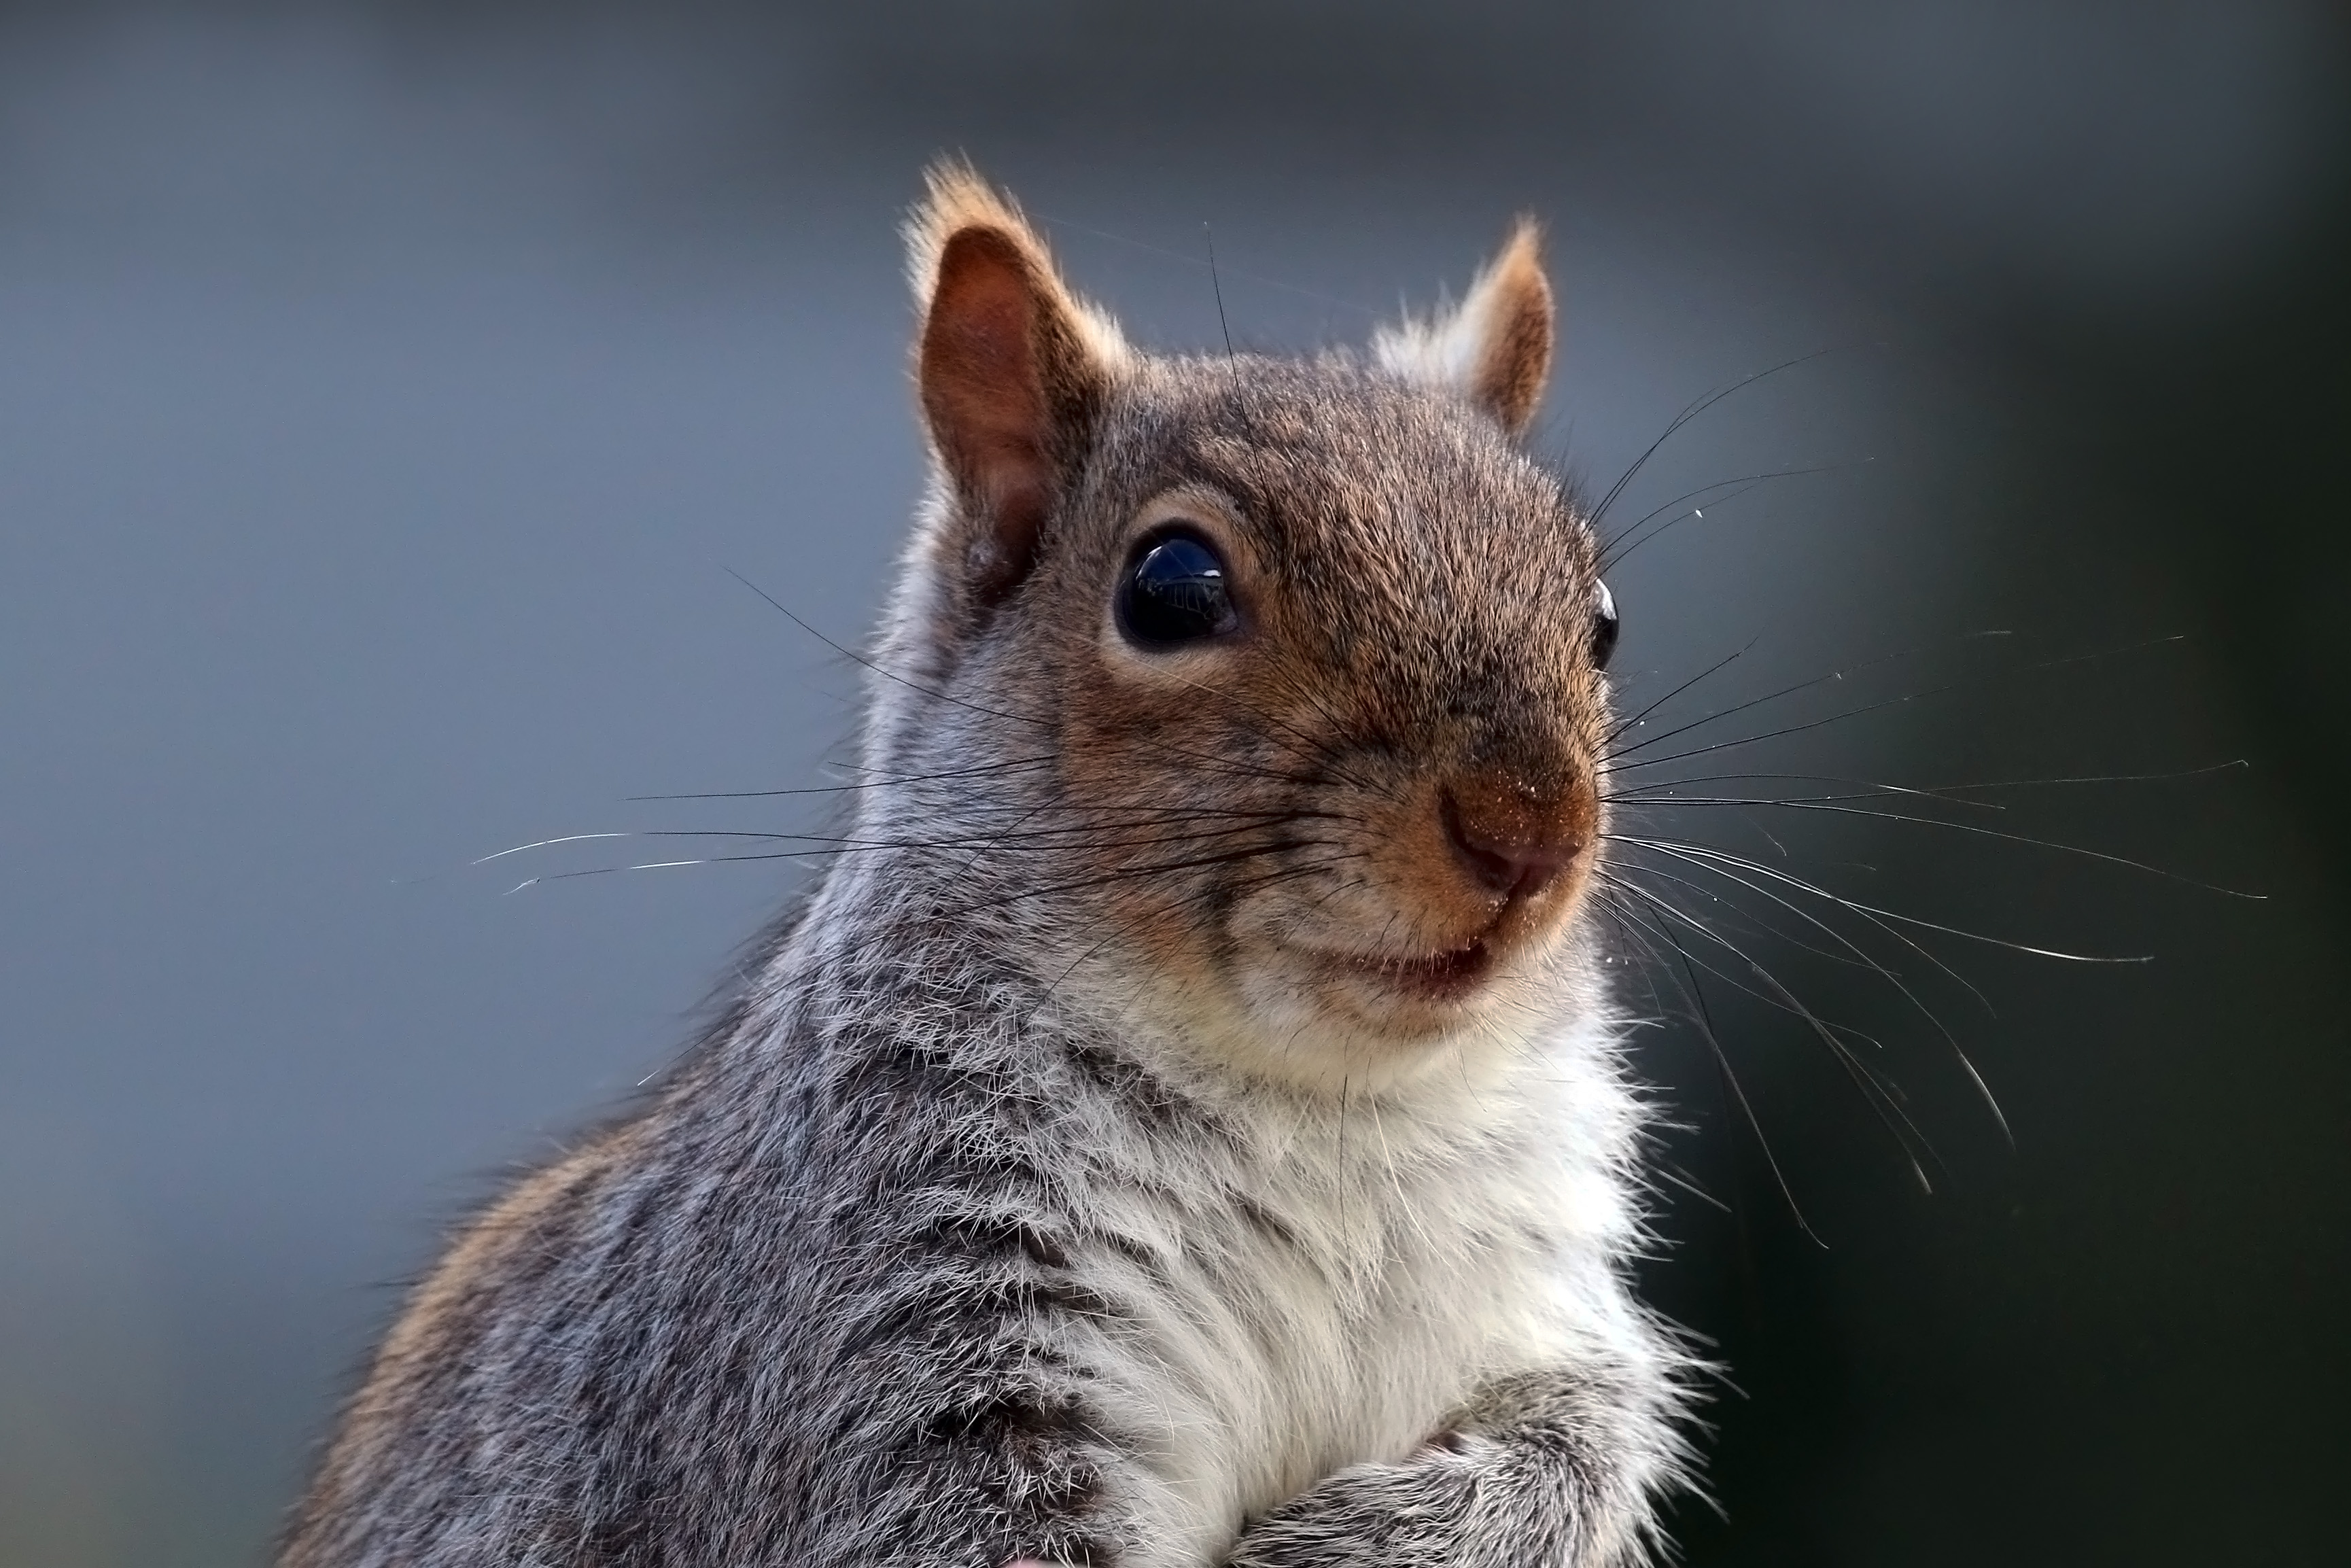 So You've Got A Squirrel Infestation: Now What? - Animal Control Specialists